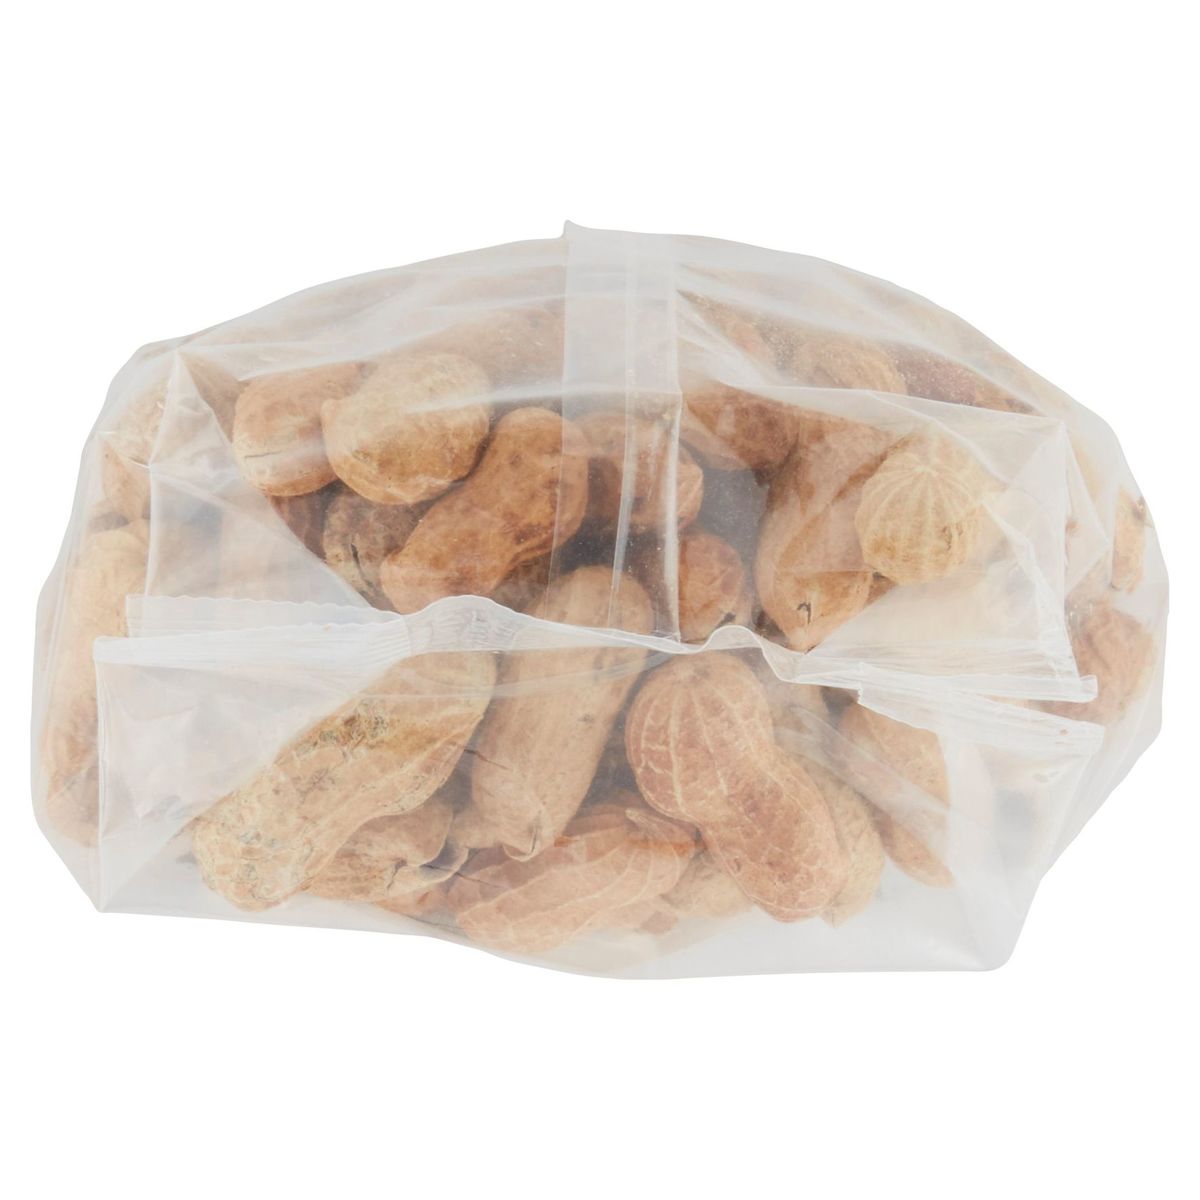 Carrefour The Market Snacking Cacahuètes Grillées 400 g